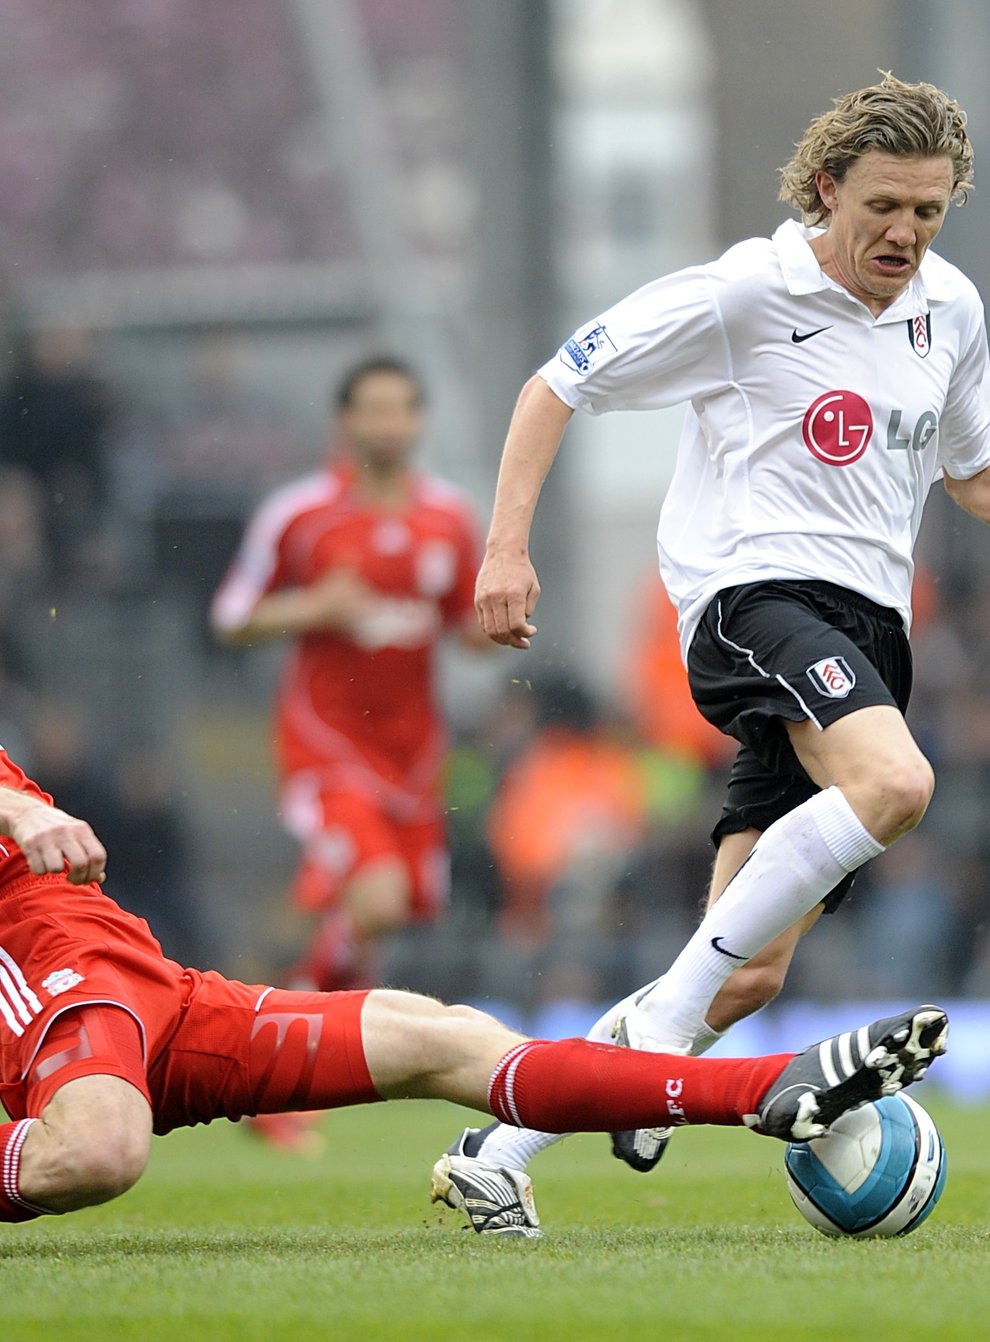 Fulham’s Jimmy Bullard (r) and Liverpool’s Sami Hyypia (l) battle for the ball (PA)